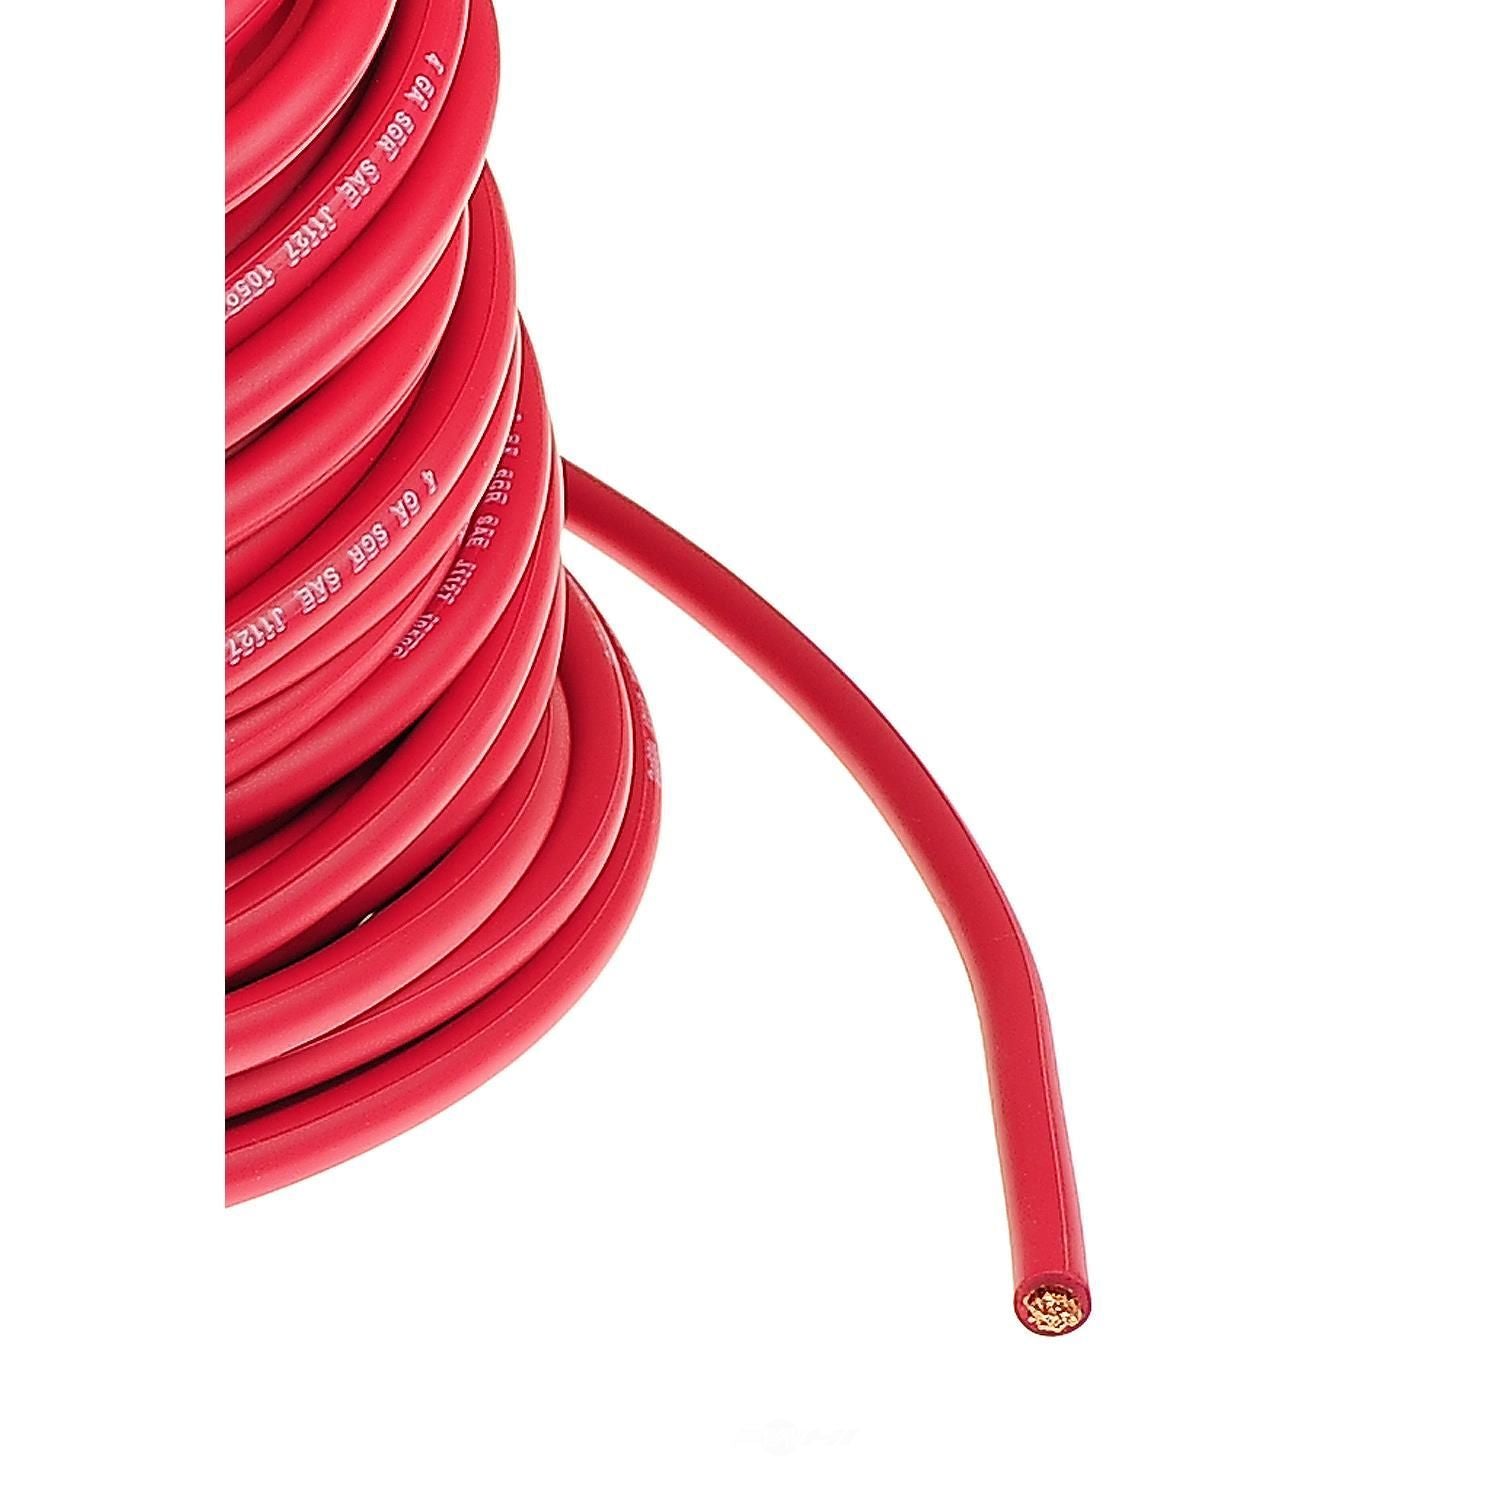 YSP CB13RD-25 Wells Bulk Cable (Red, 25', 4G)